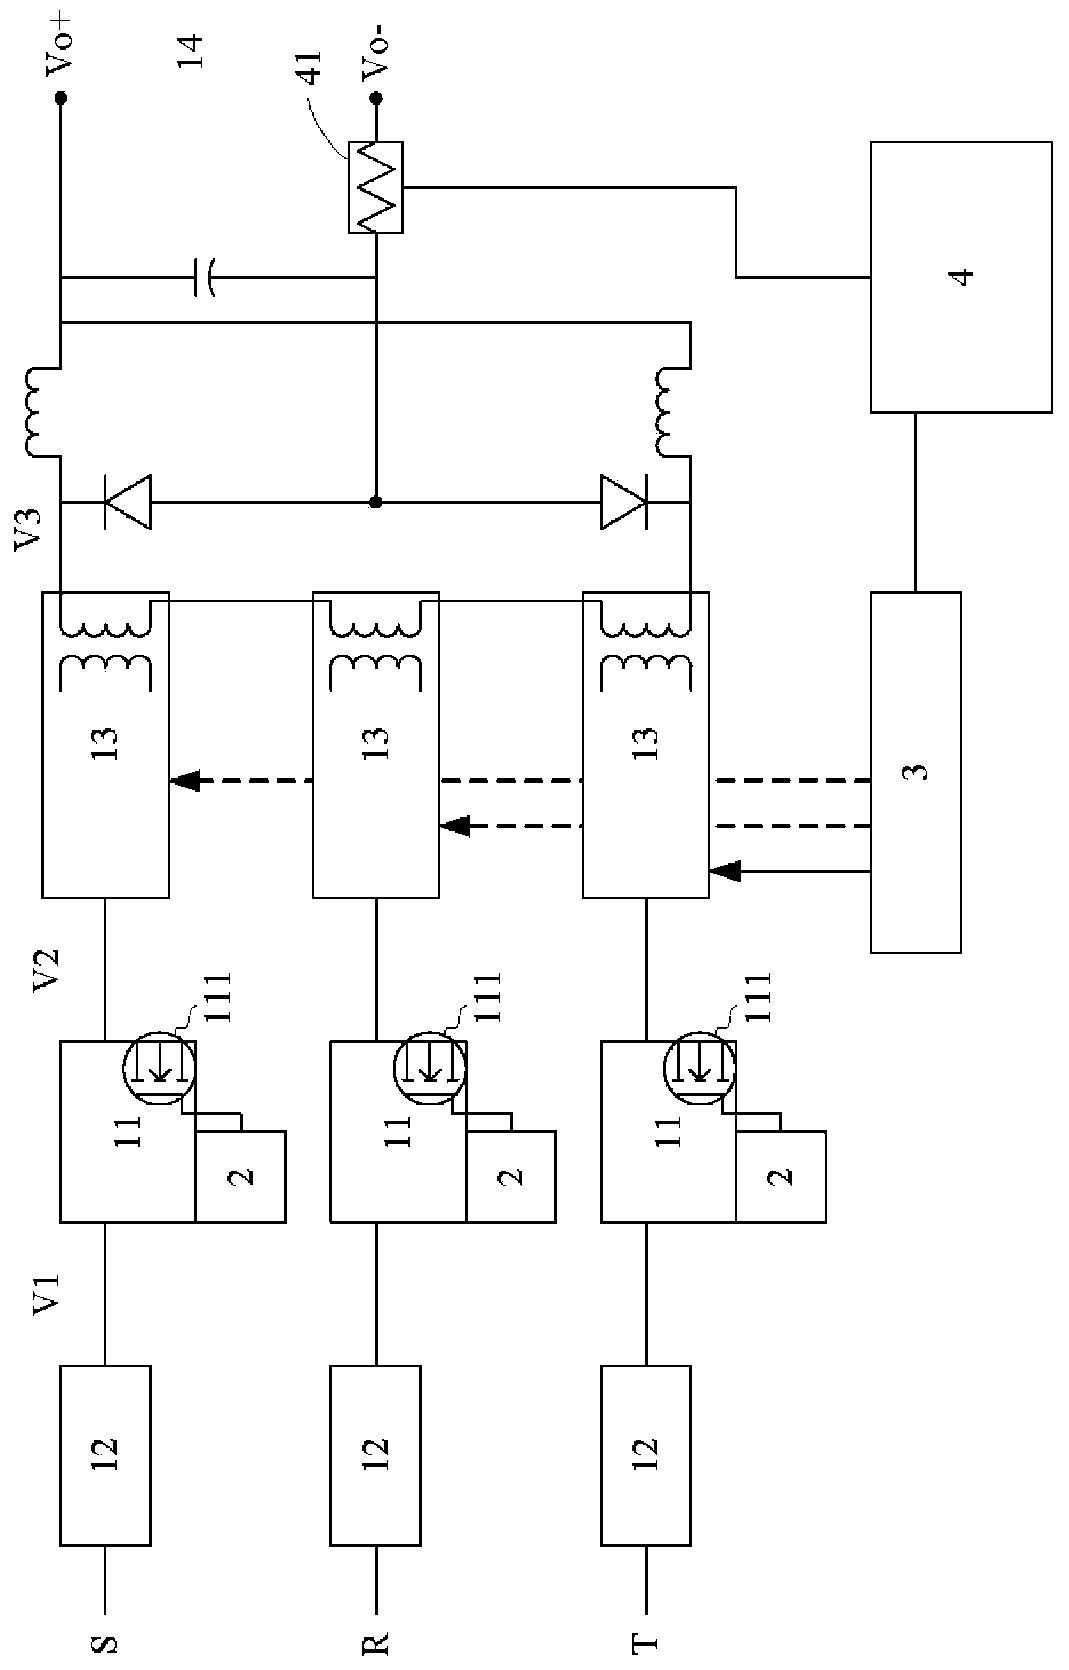 Power supply with power factor correction circuit